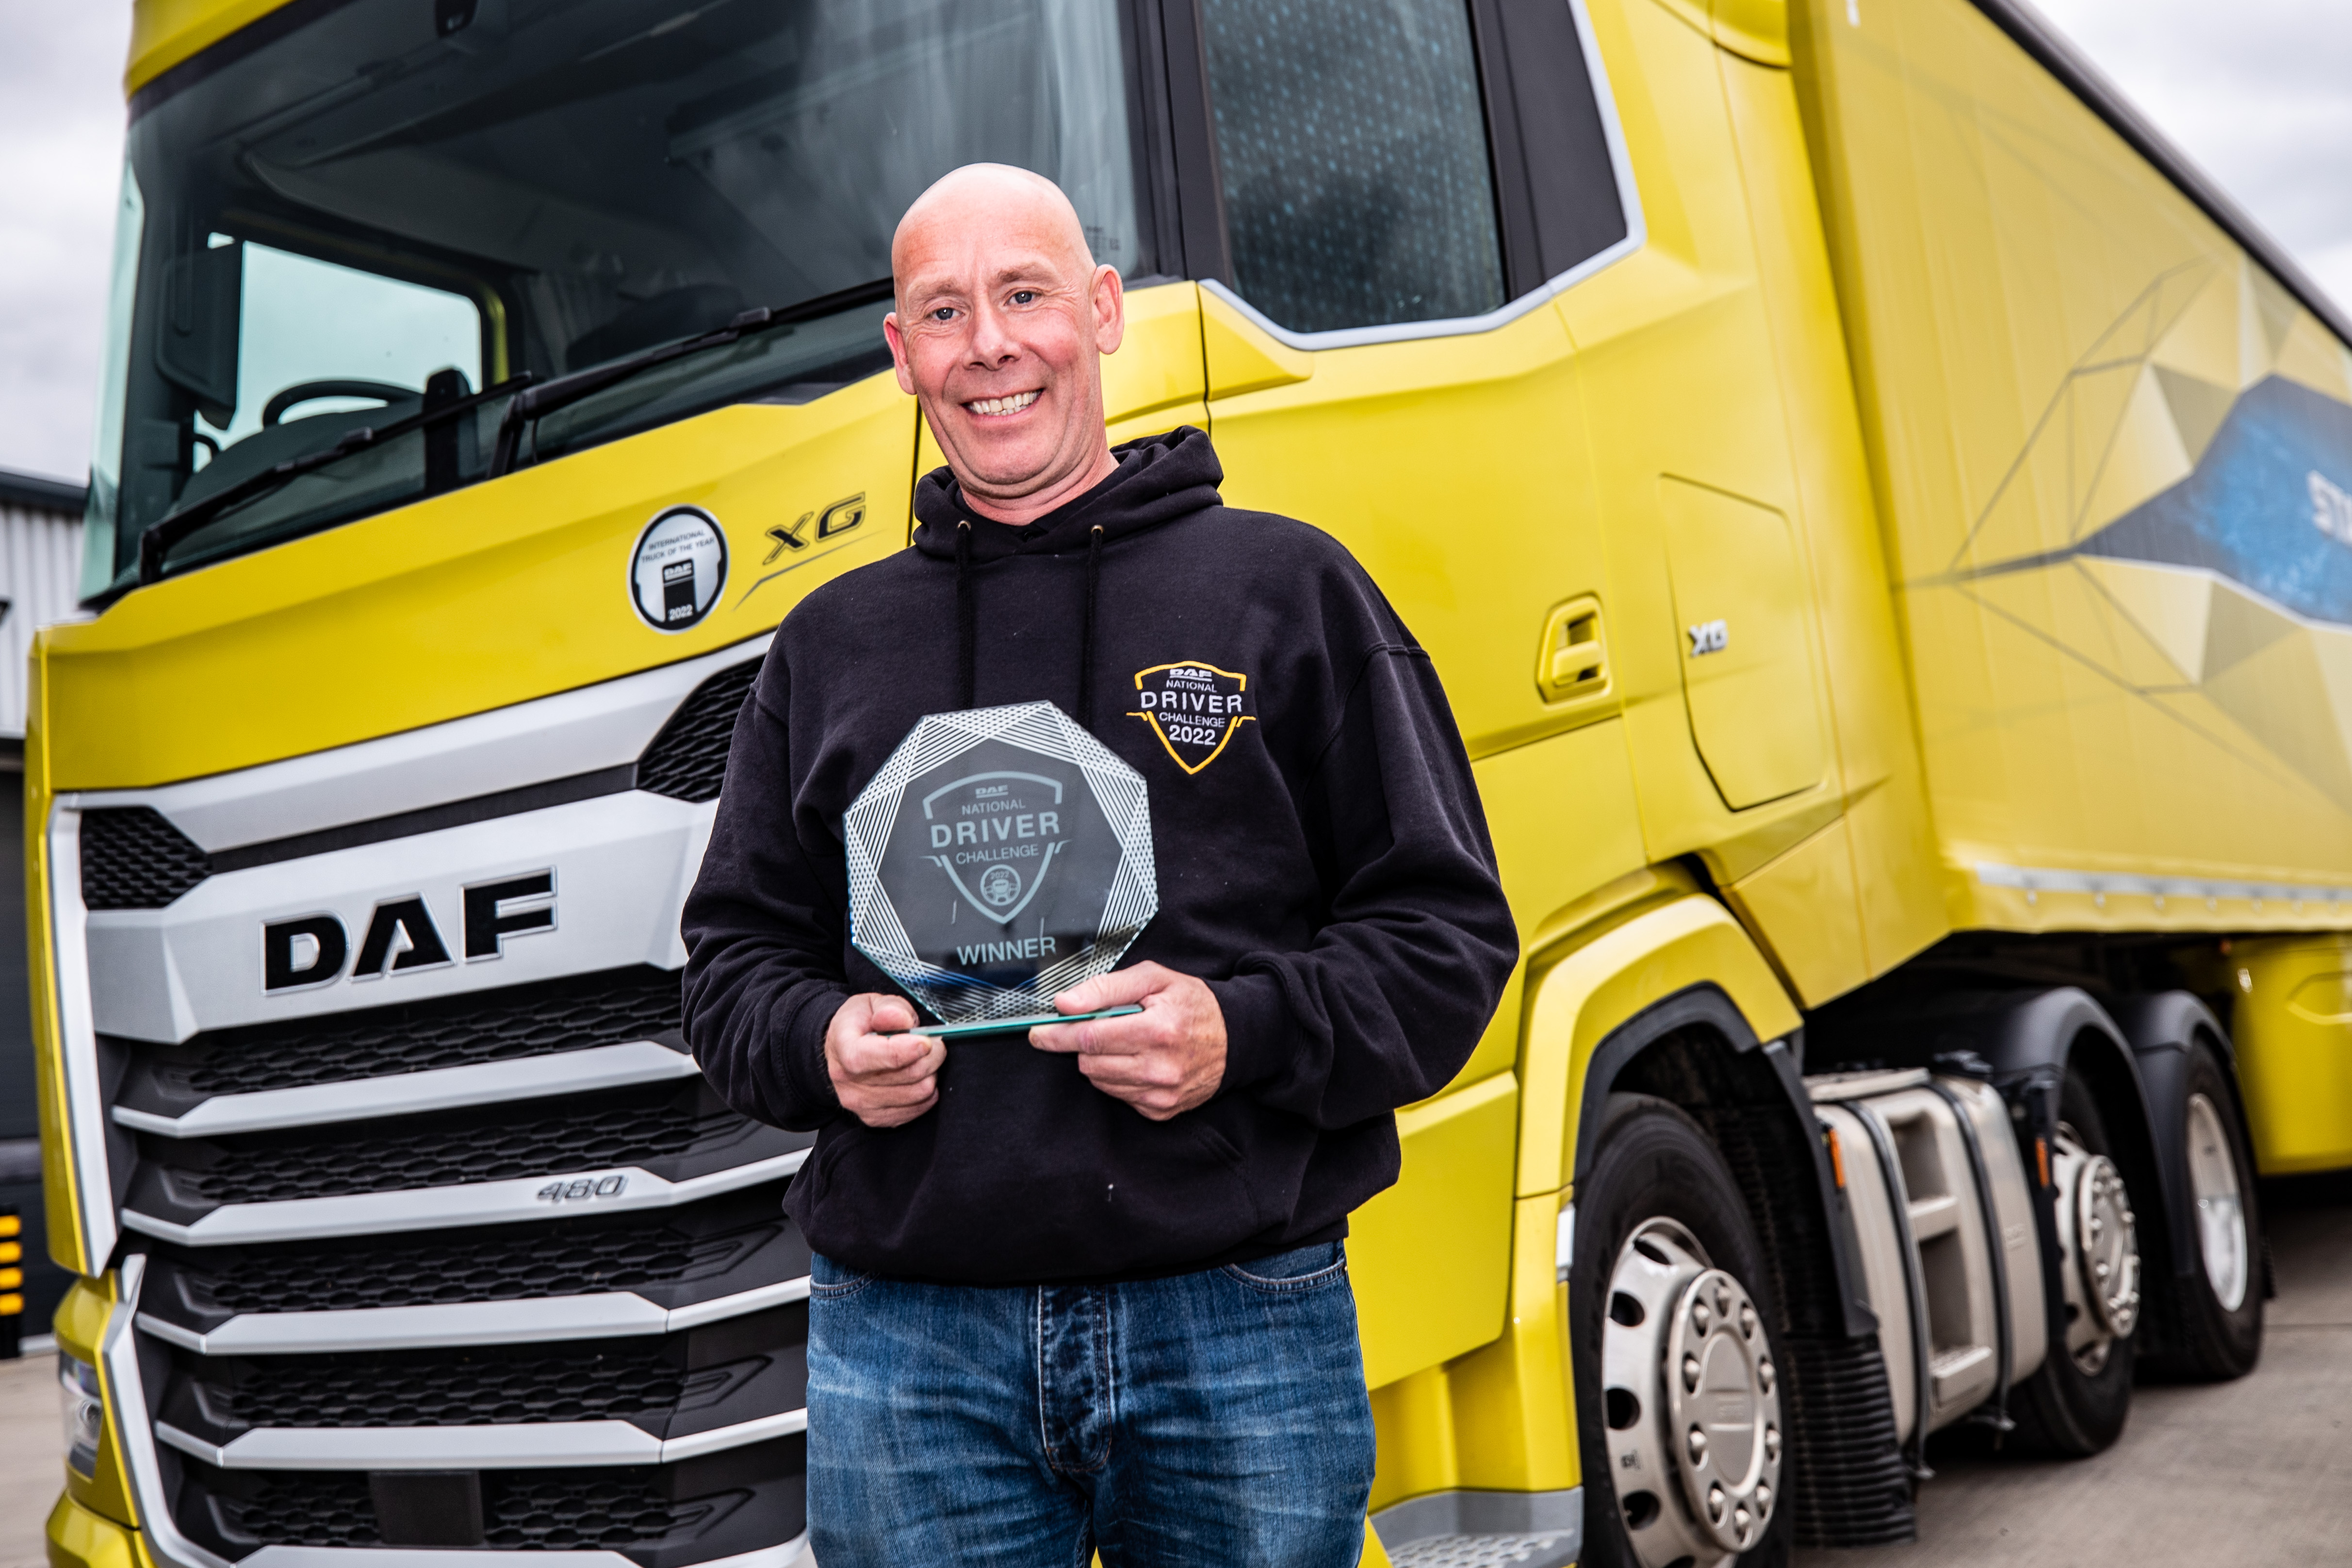 DAF Driver Challenge Colin Court in front of New Generation truck